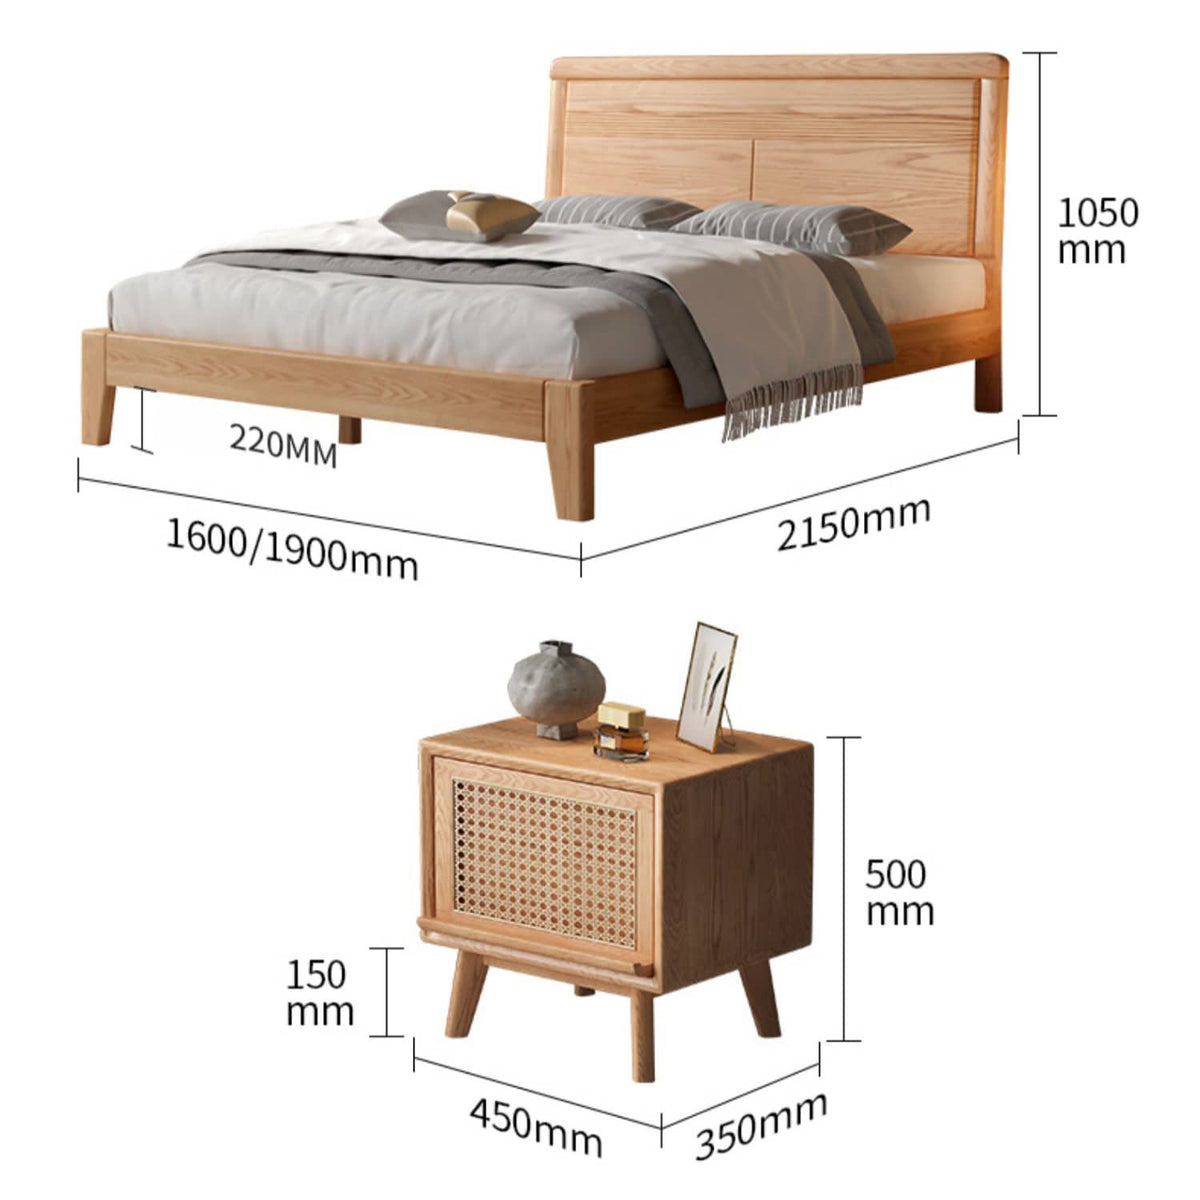 Stunning Natural Oak and Pine Wood Bed - Elegant and Durable hbzwg-634